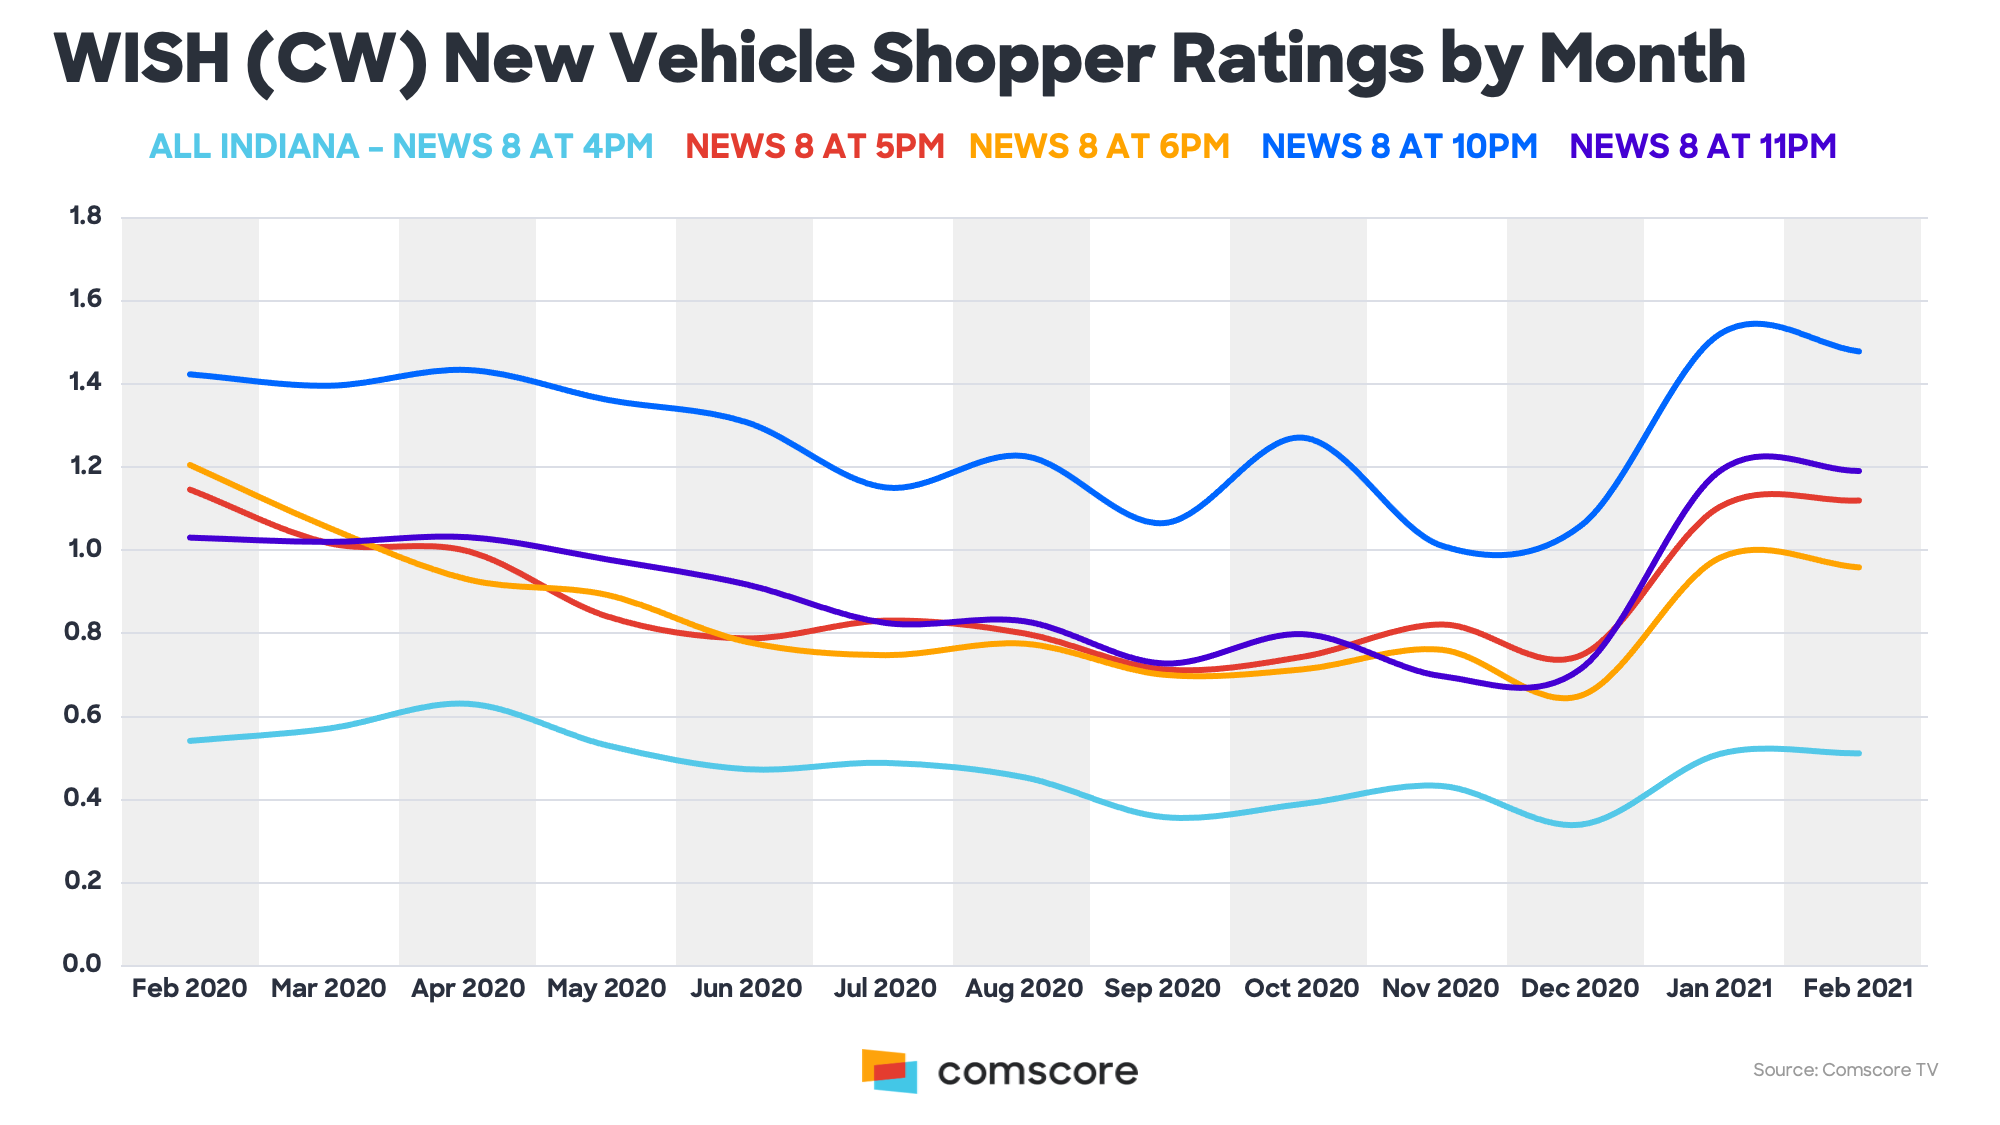 WISH CW New Vehicle Shopper Ratings by Month